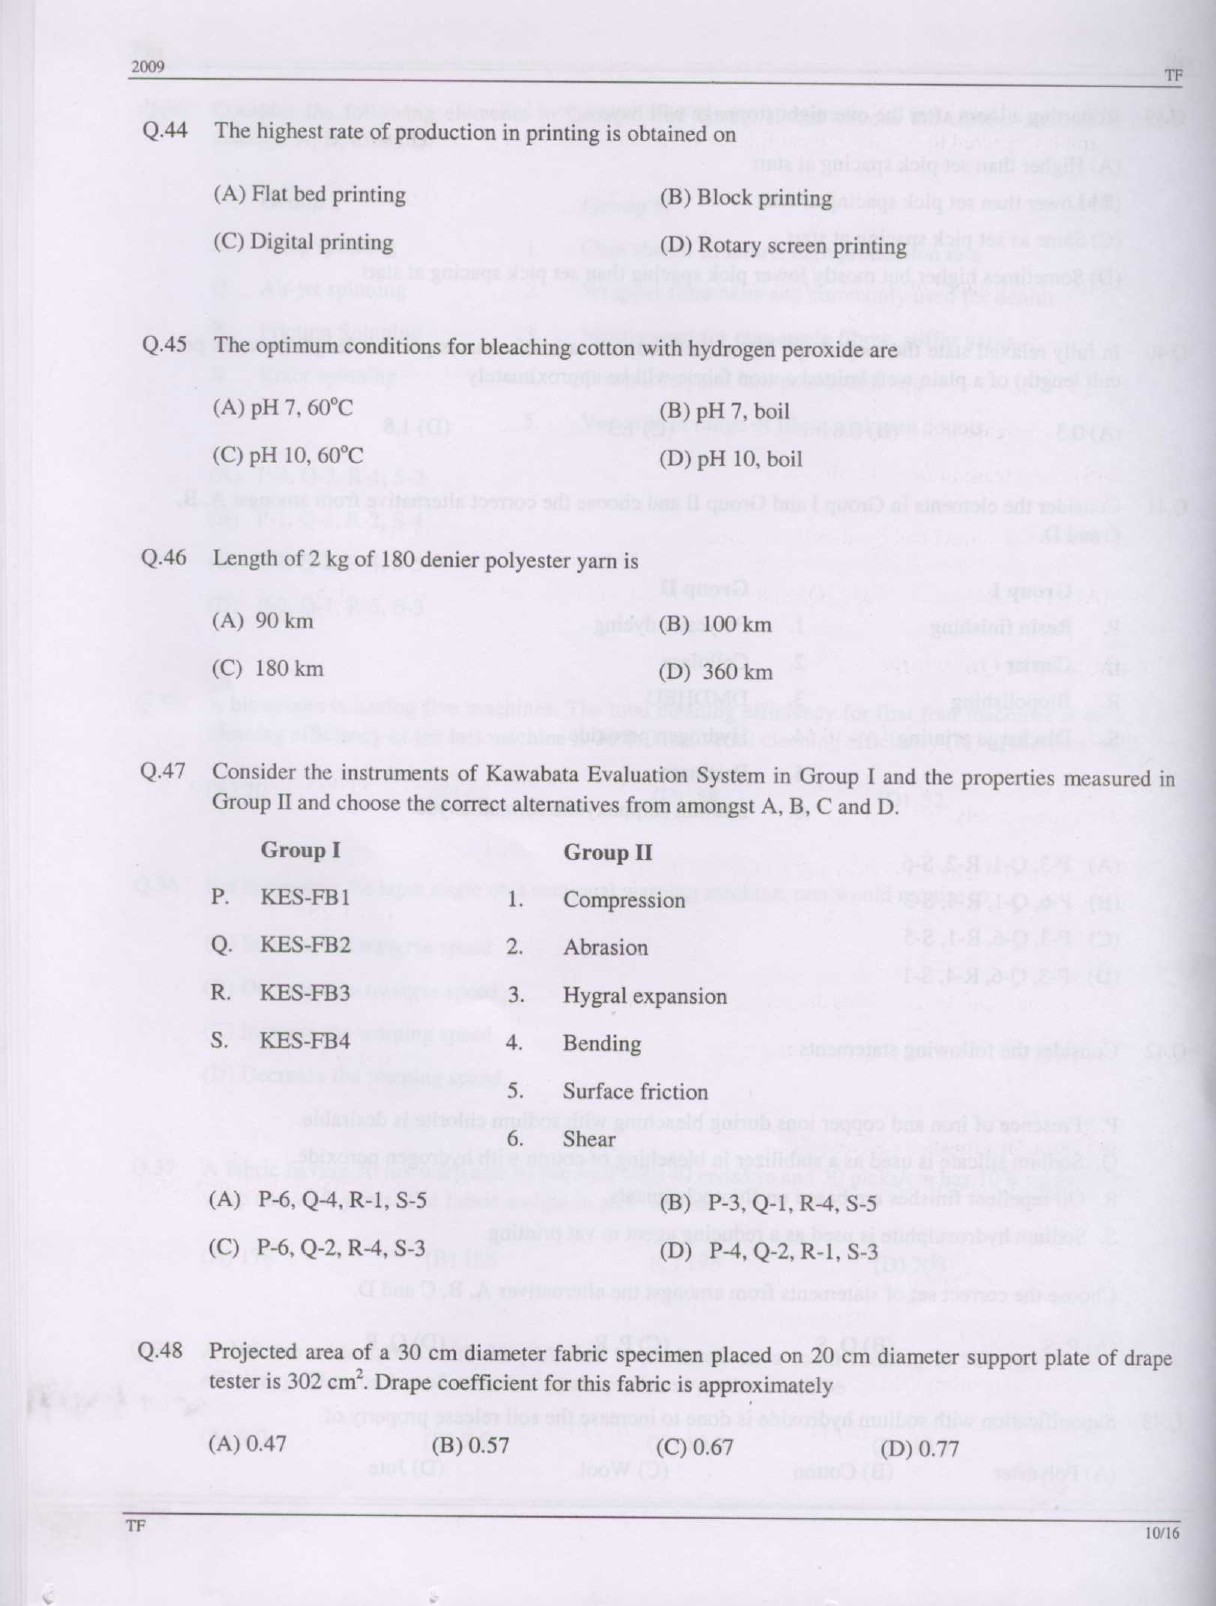 GATE Exam Question Paper 2009 Textile Engineering and Fibre Science 10